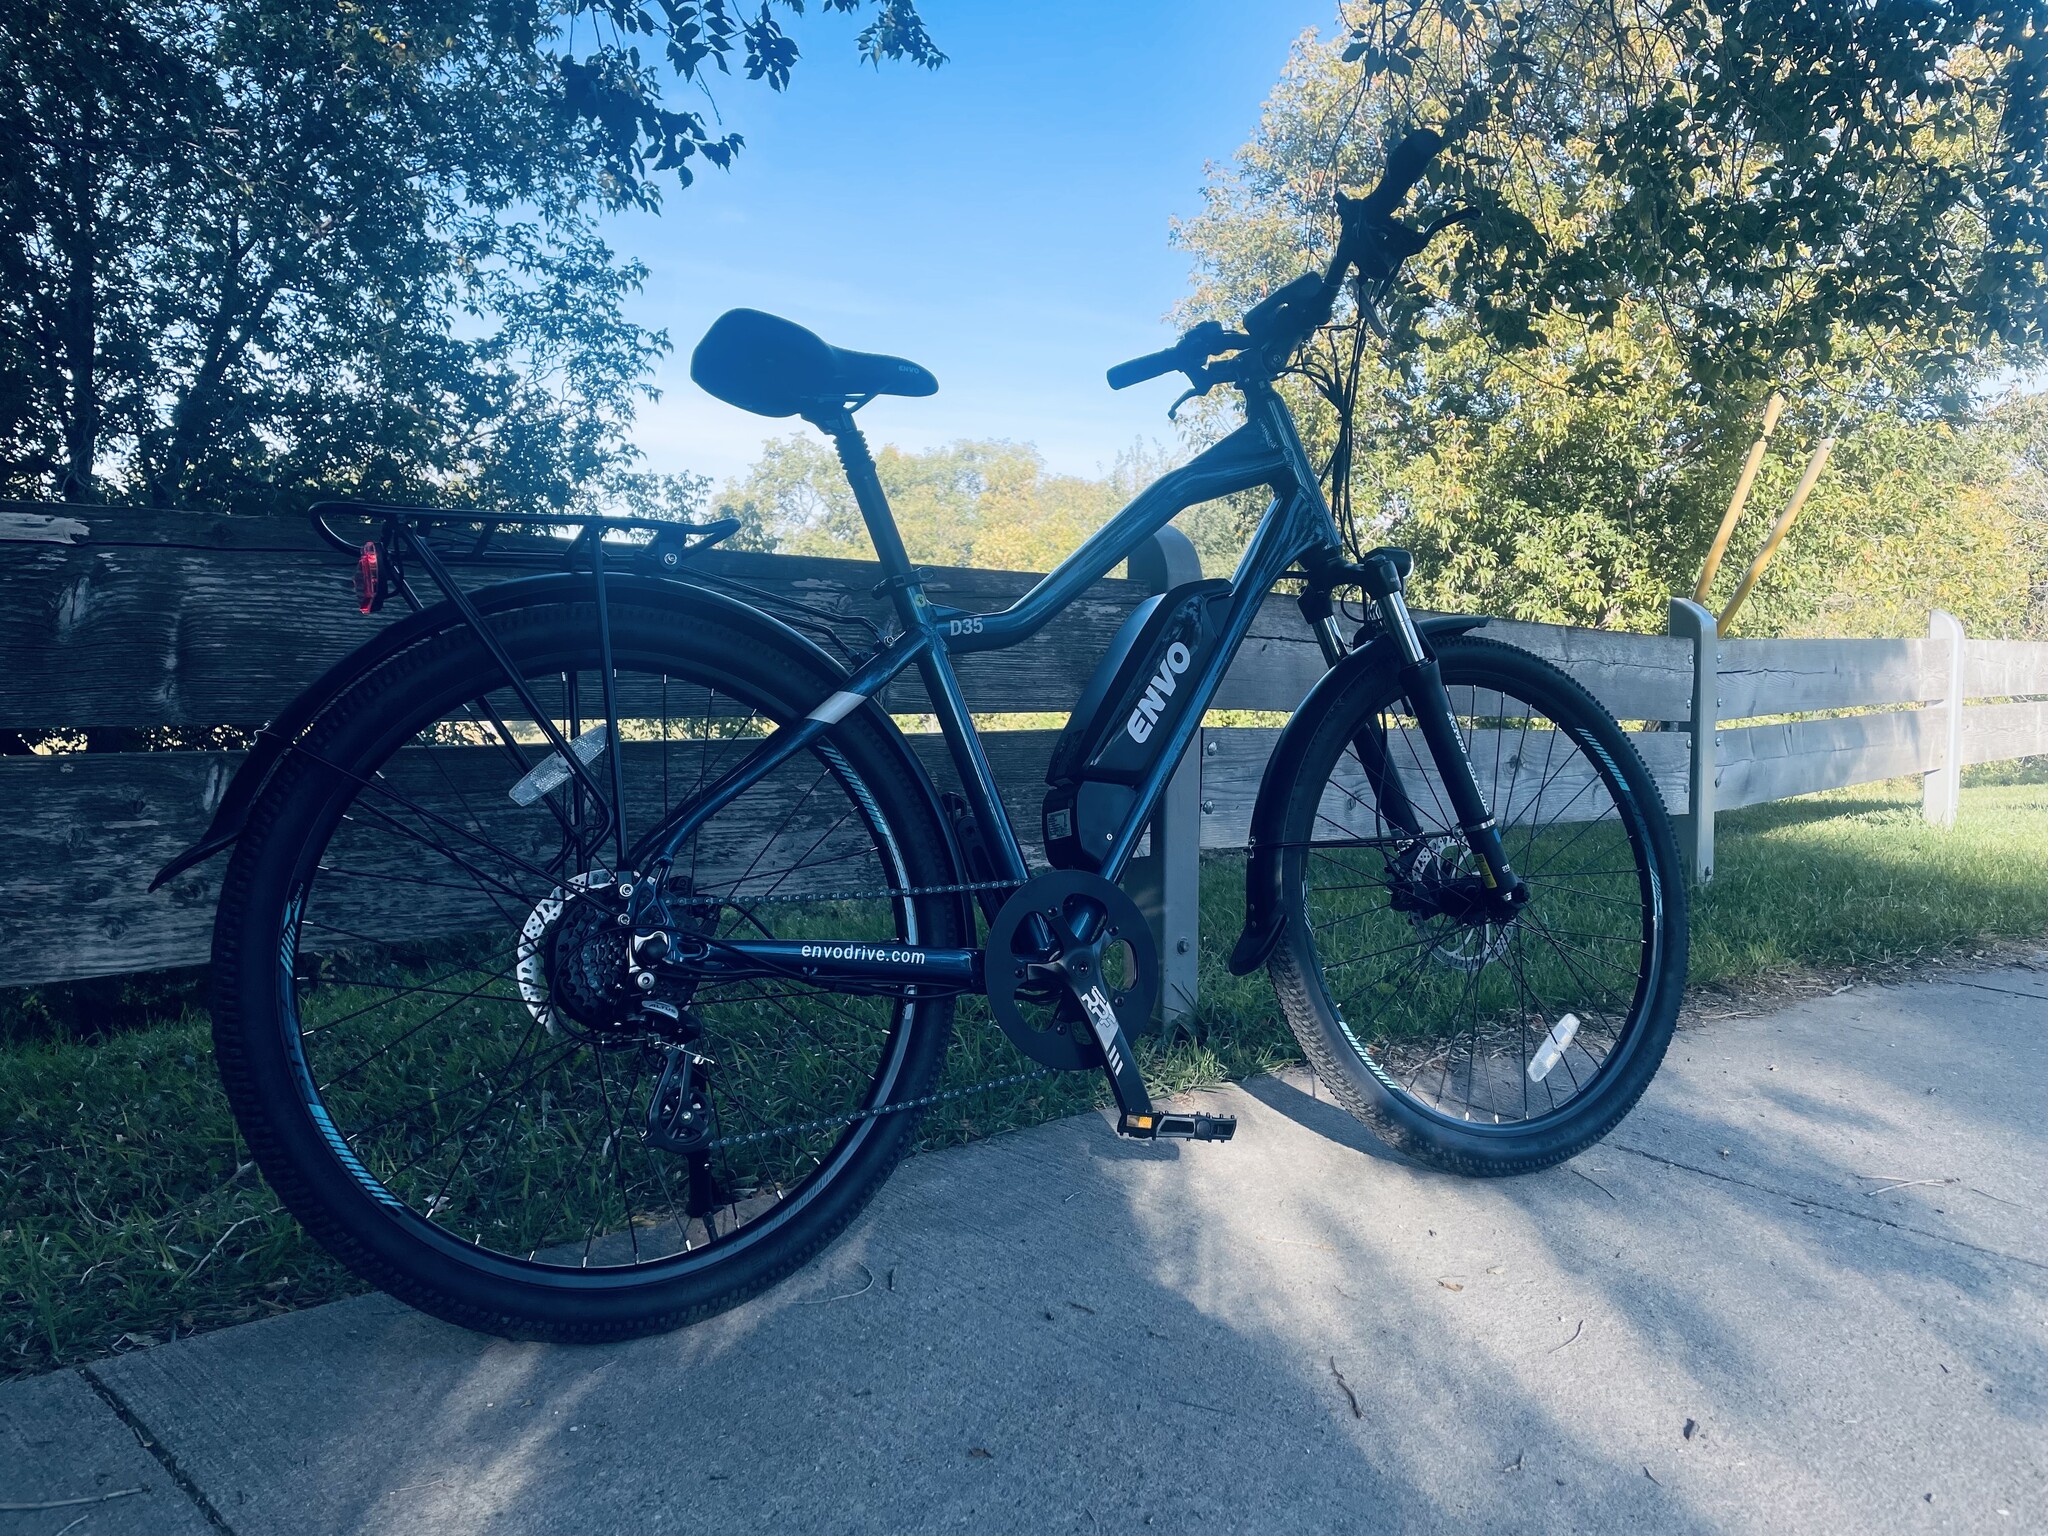 Which is better Mid Drive or Hub Drive e-bike?